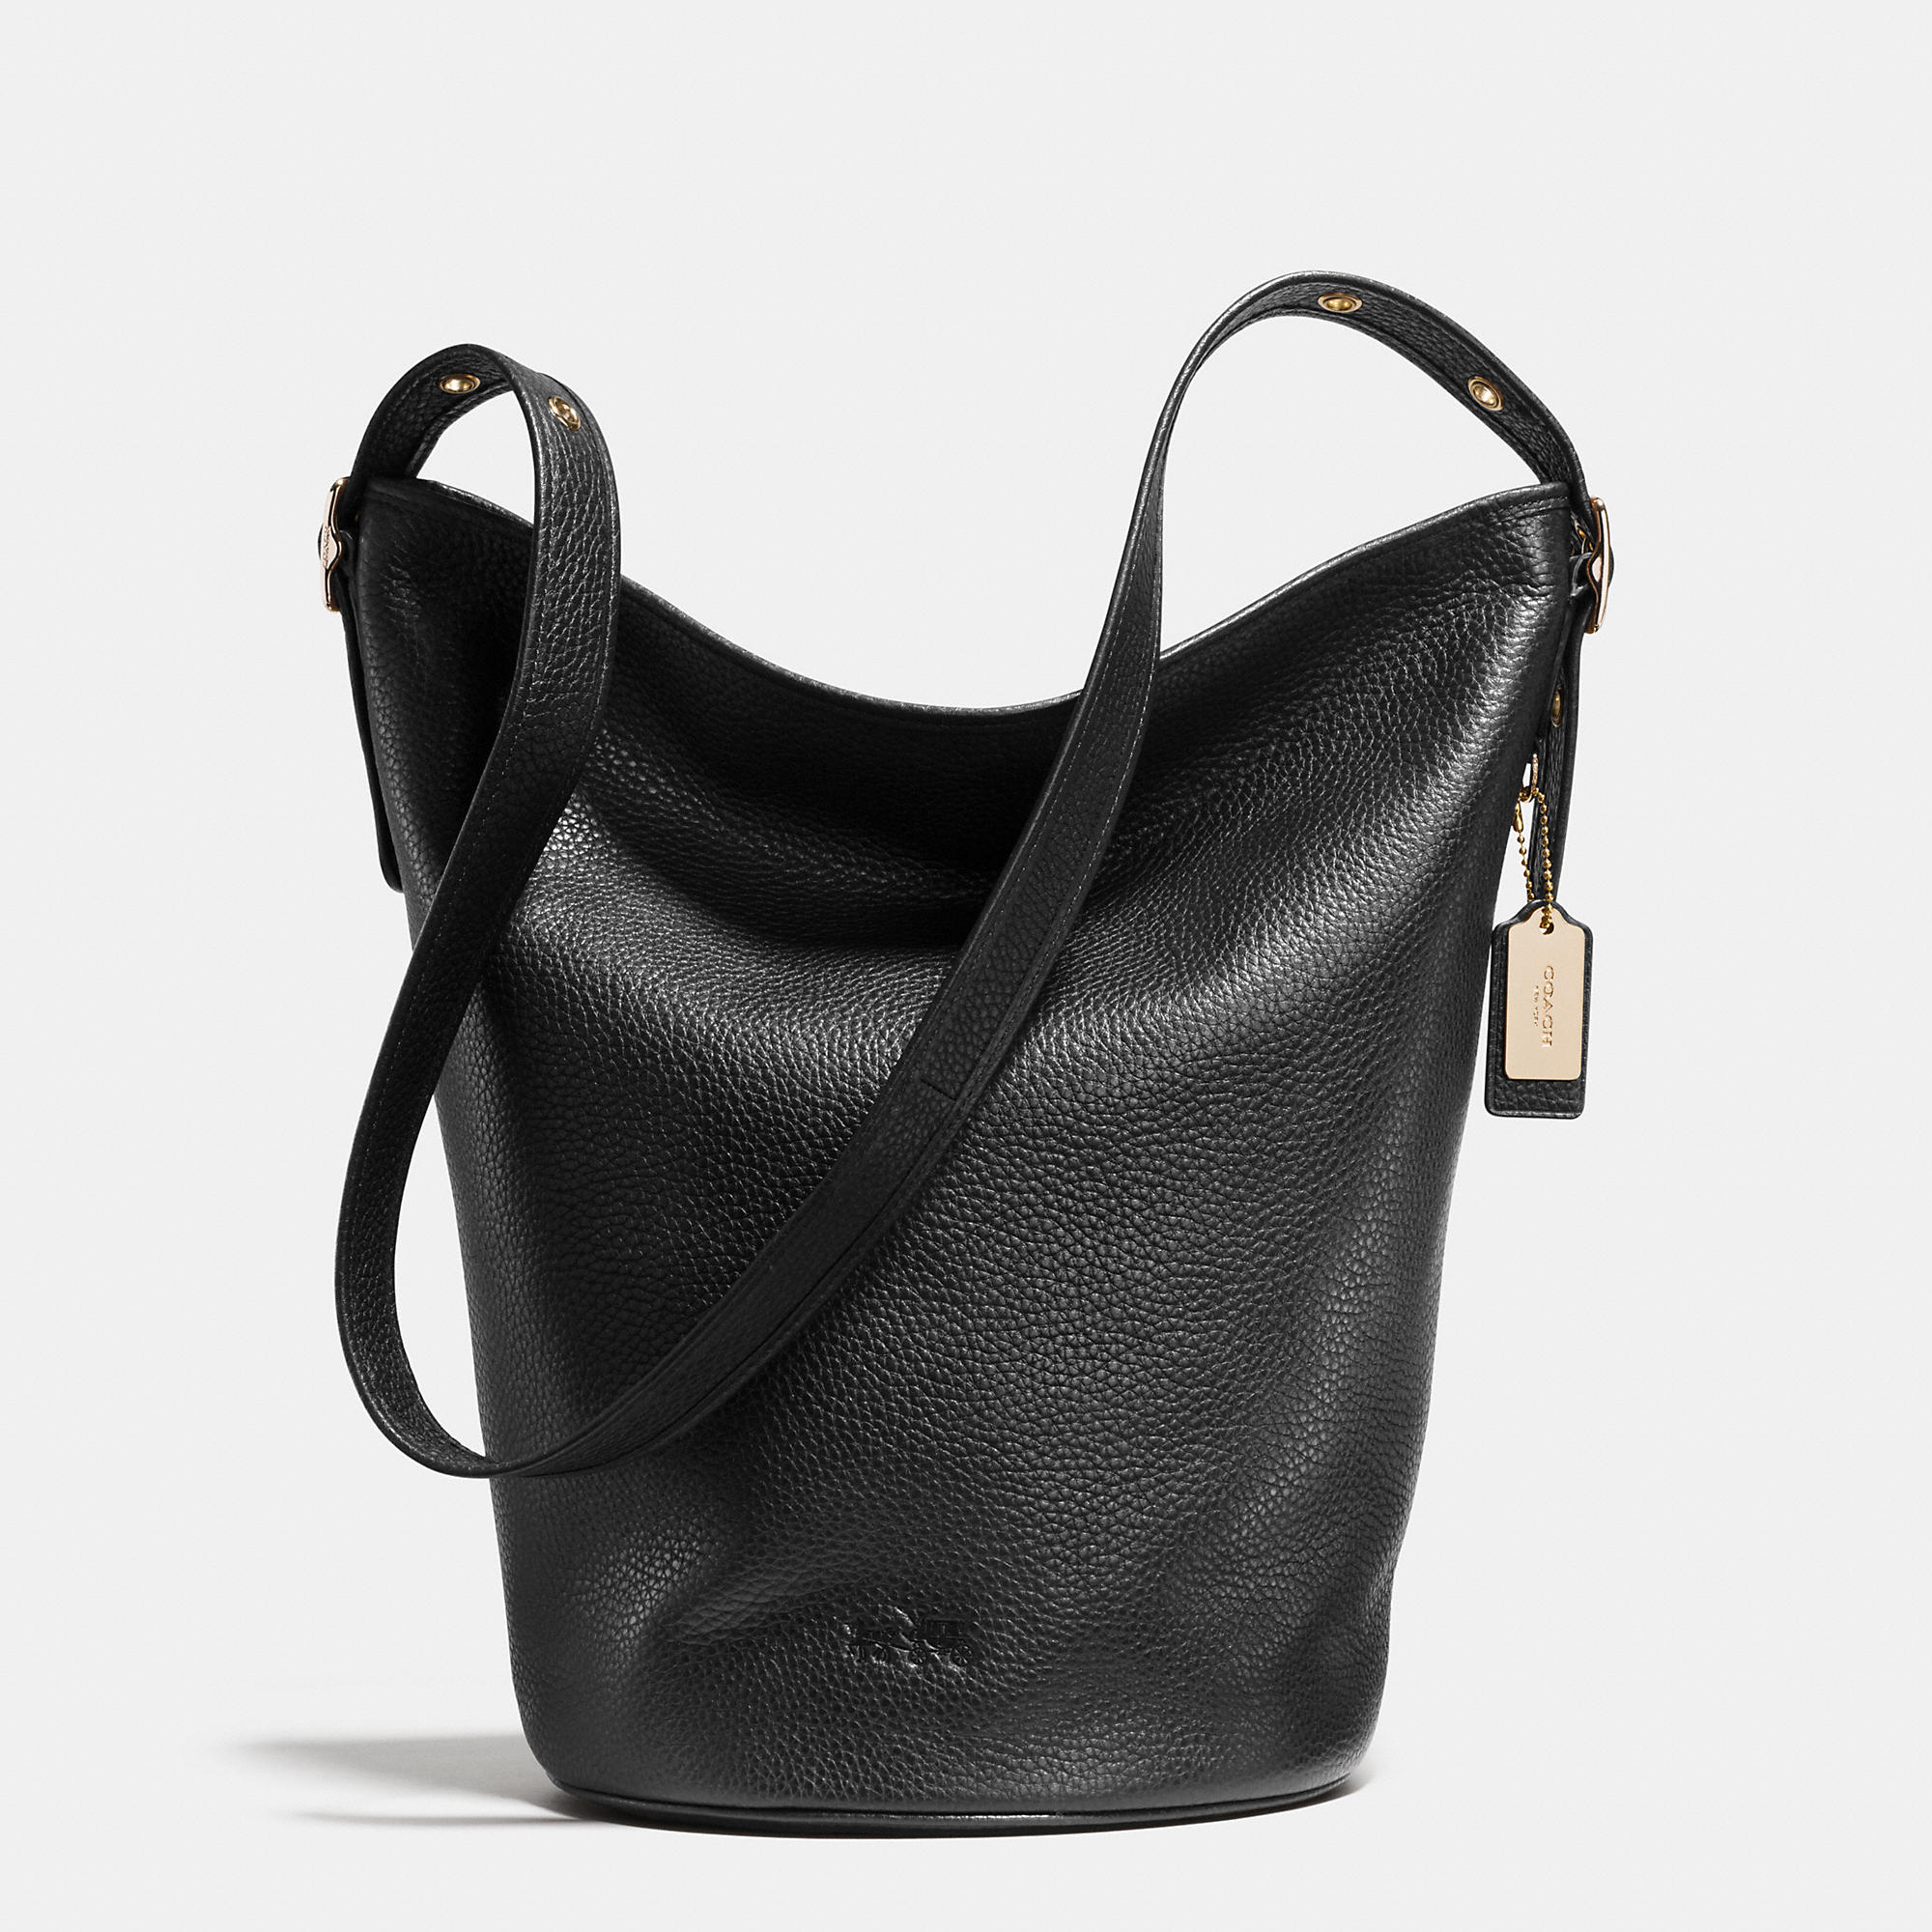 Lyst - Coach Duffle Shoulder Bag In Pebble Leather in Black